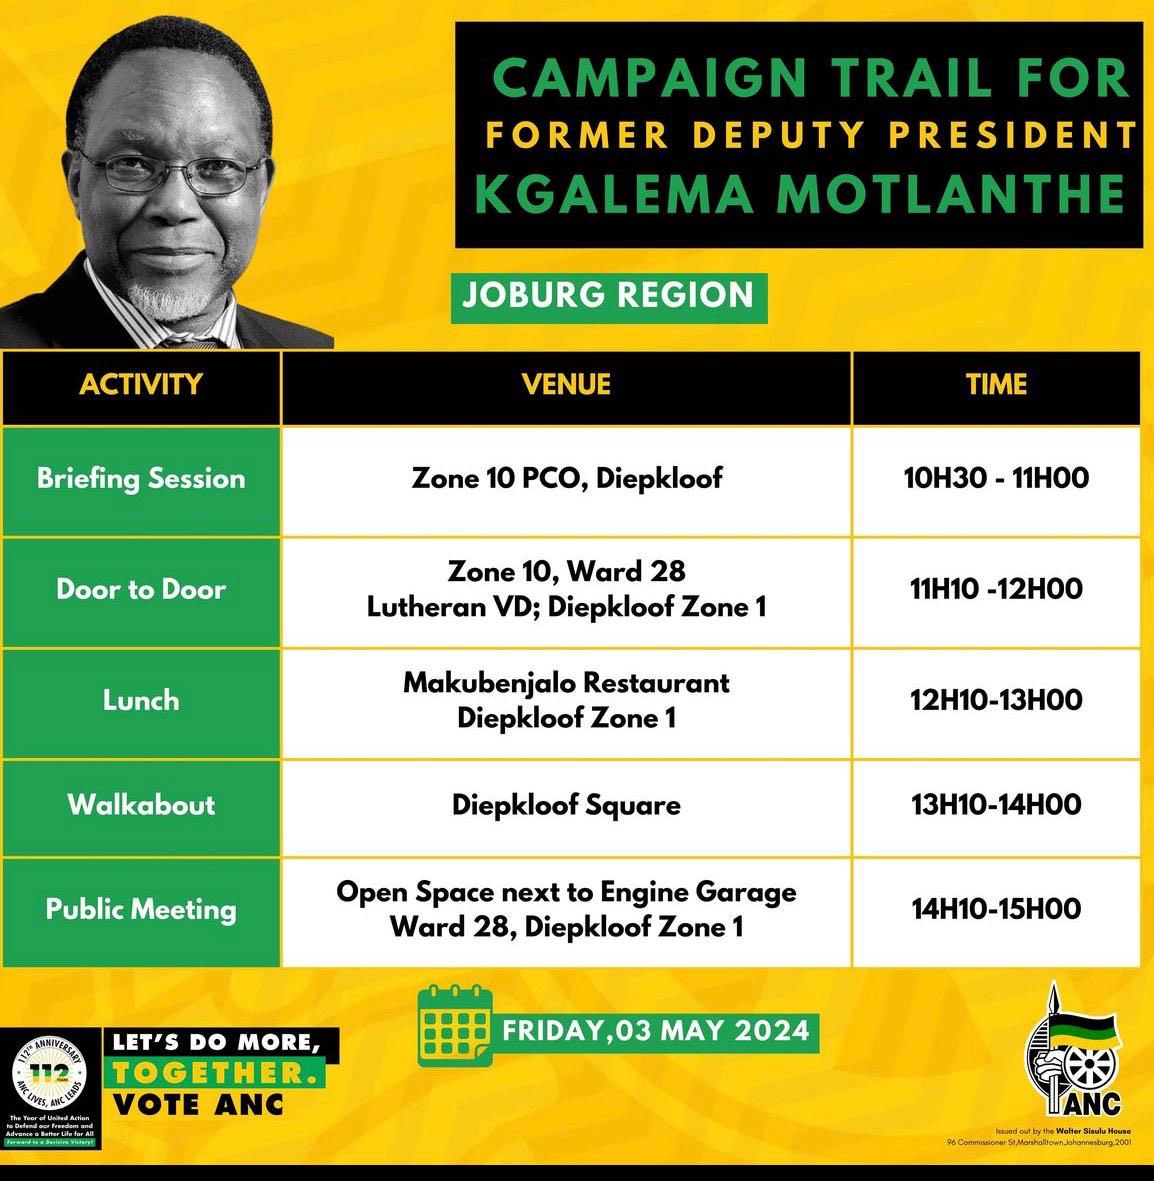 Former Deputy President of ⁦@MYANC⁩ Kgalema Motlanthe is joining the party campaign tomorrow.